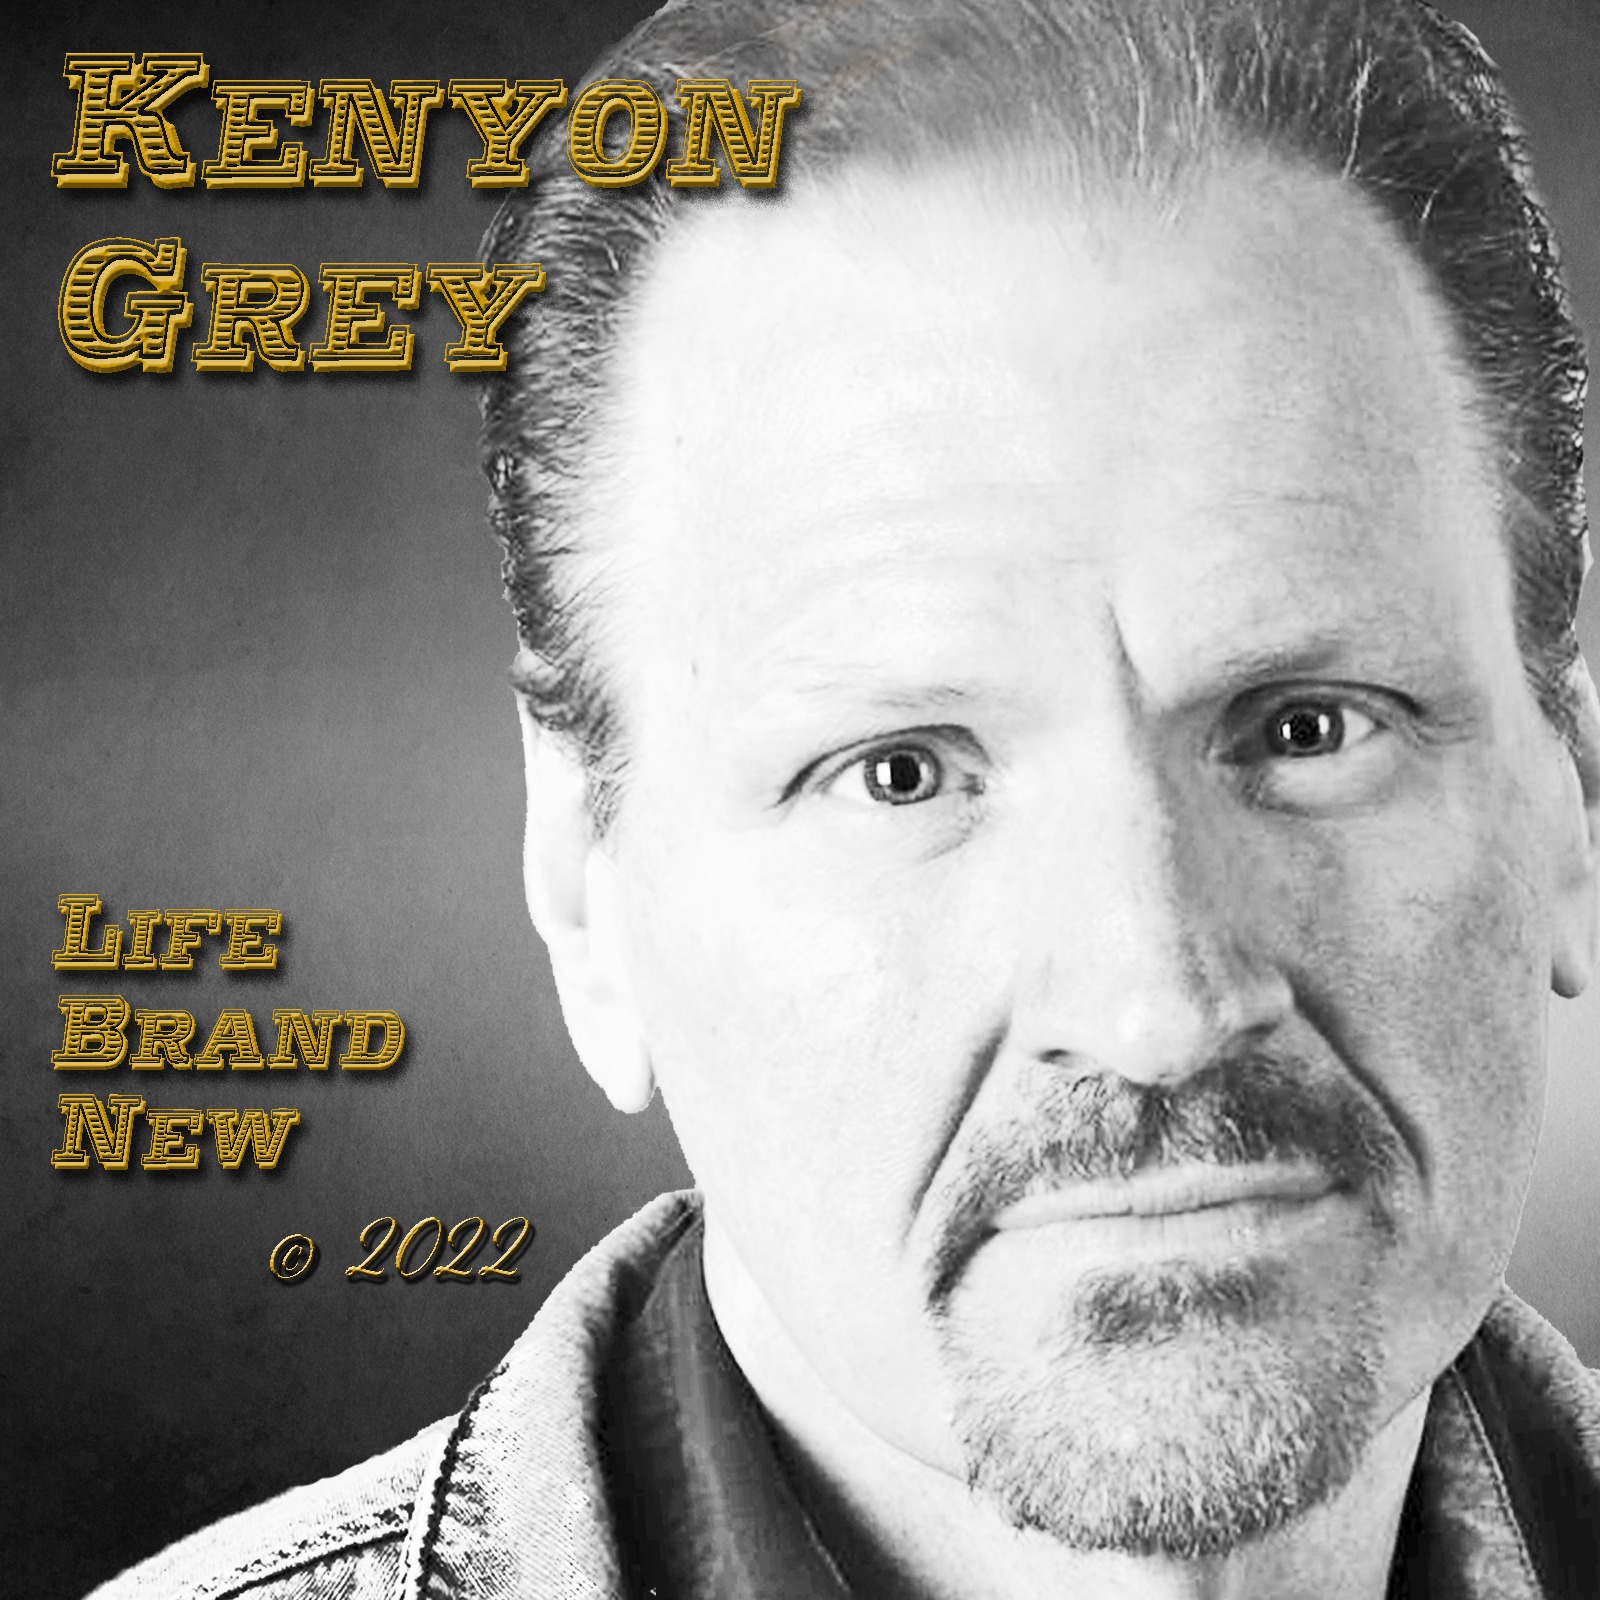 Life’s Many Colors and Faces Renewed through Enriching Country Rhythms - AOK Records’ Kenyon Grey Releases New Single